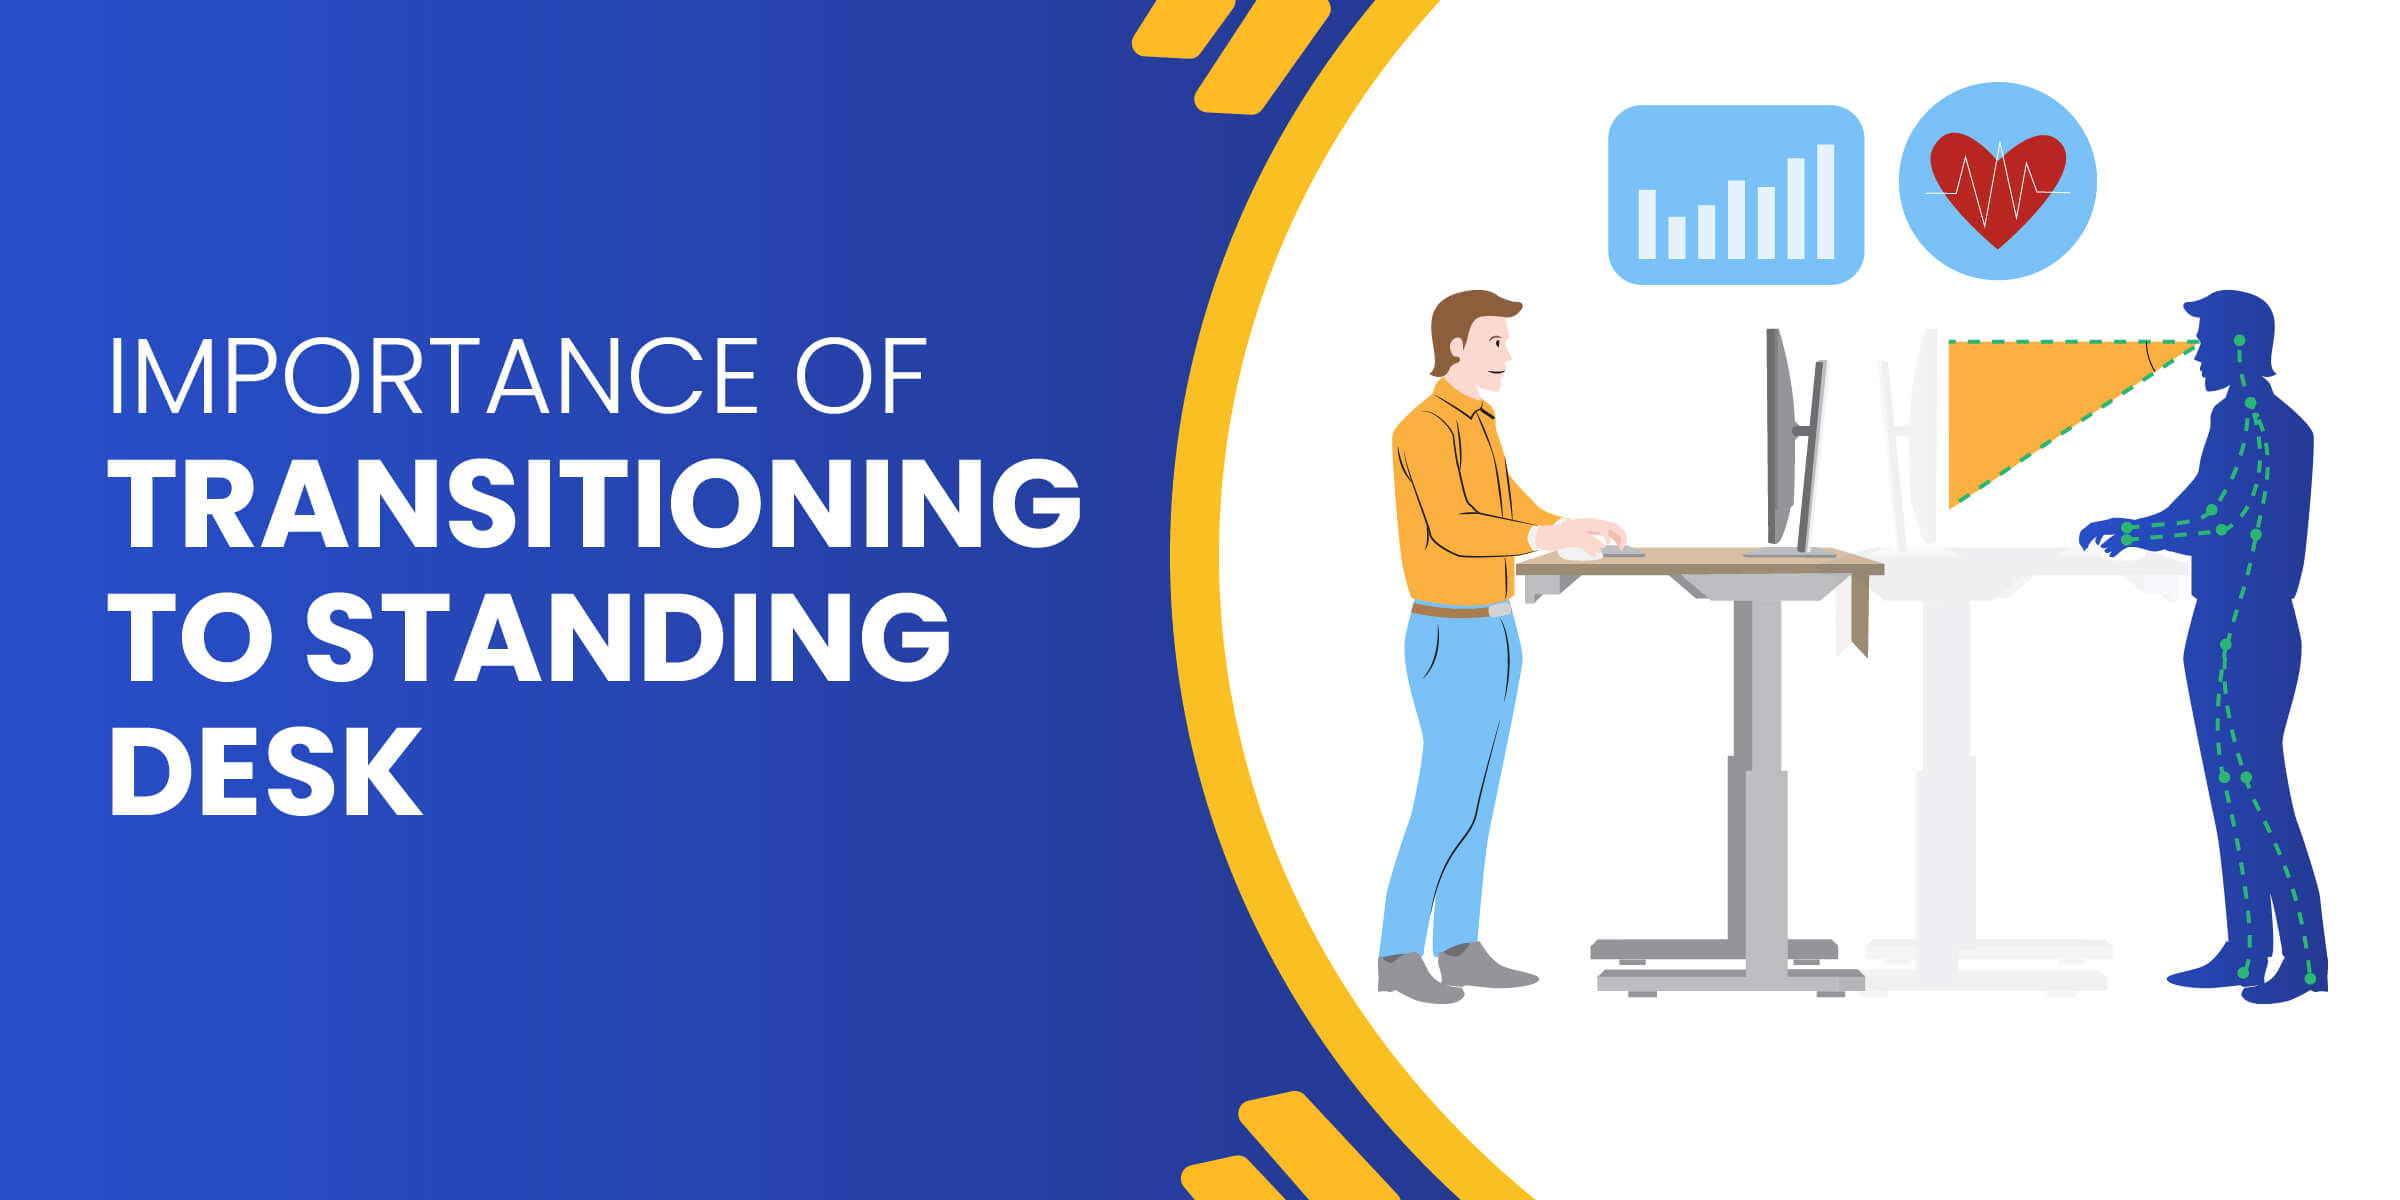 Importance of Transitioning to Standing Desk